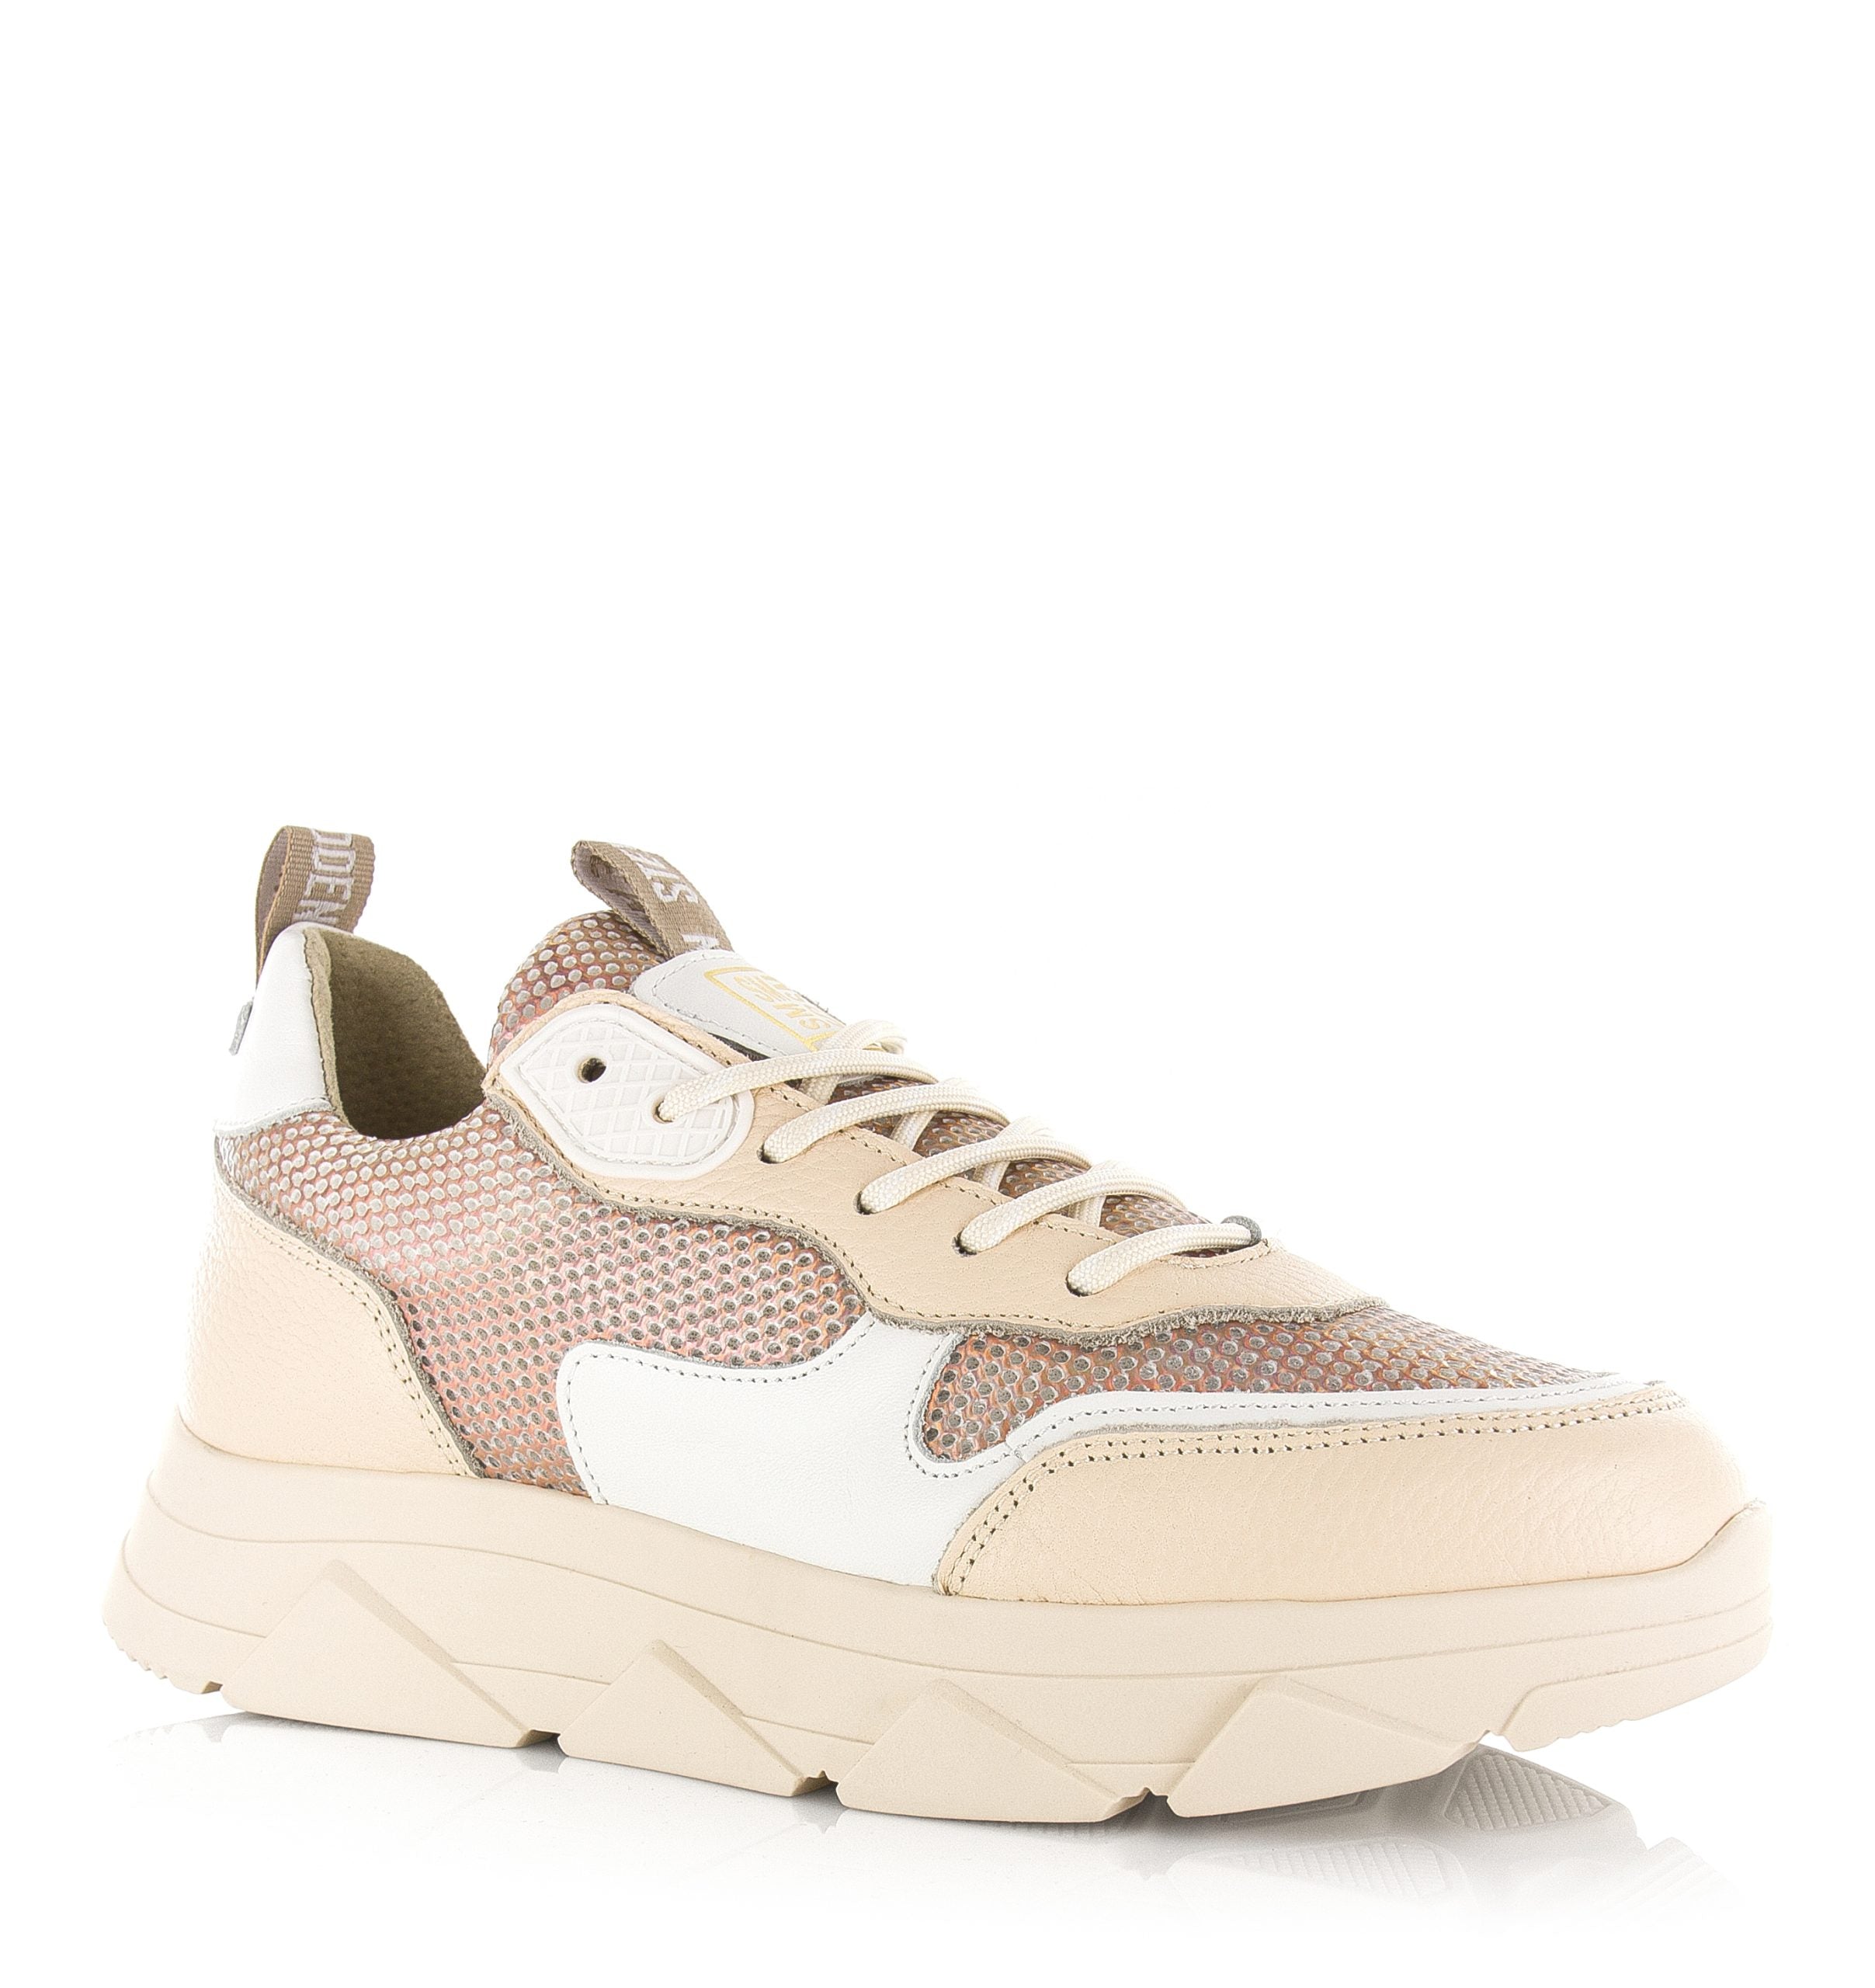 Pitty Sneaker Bone/Gold- Hover Image